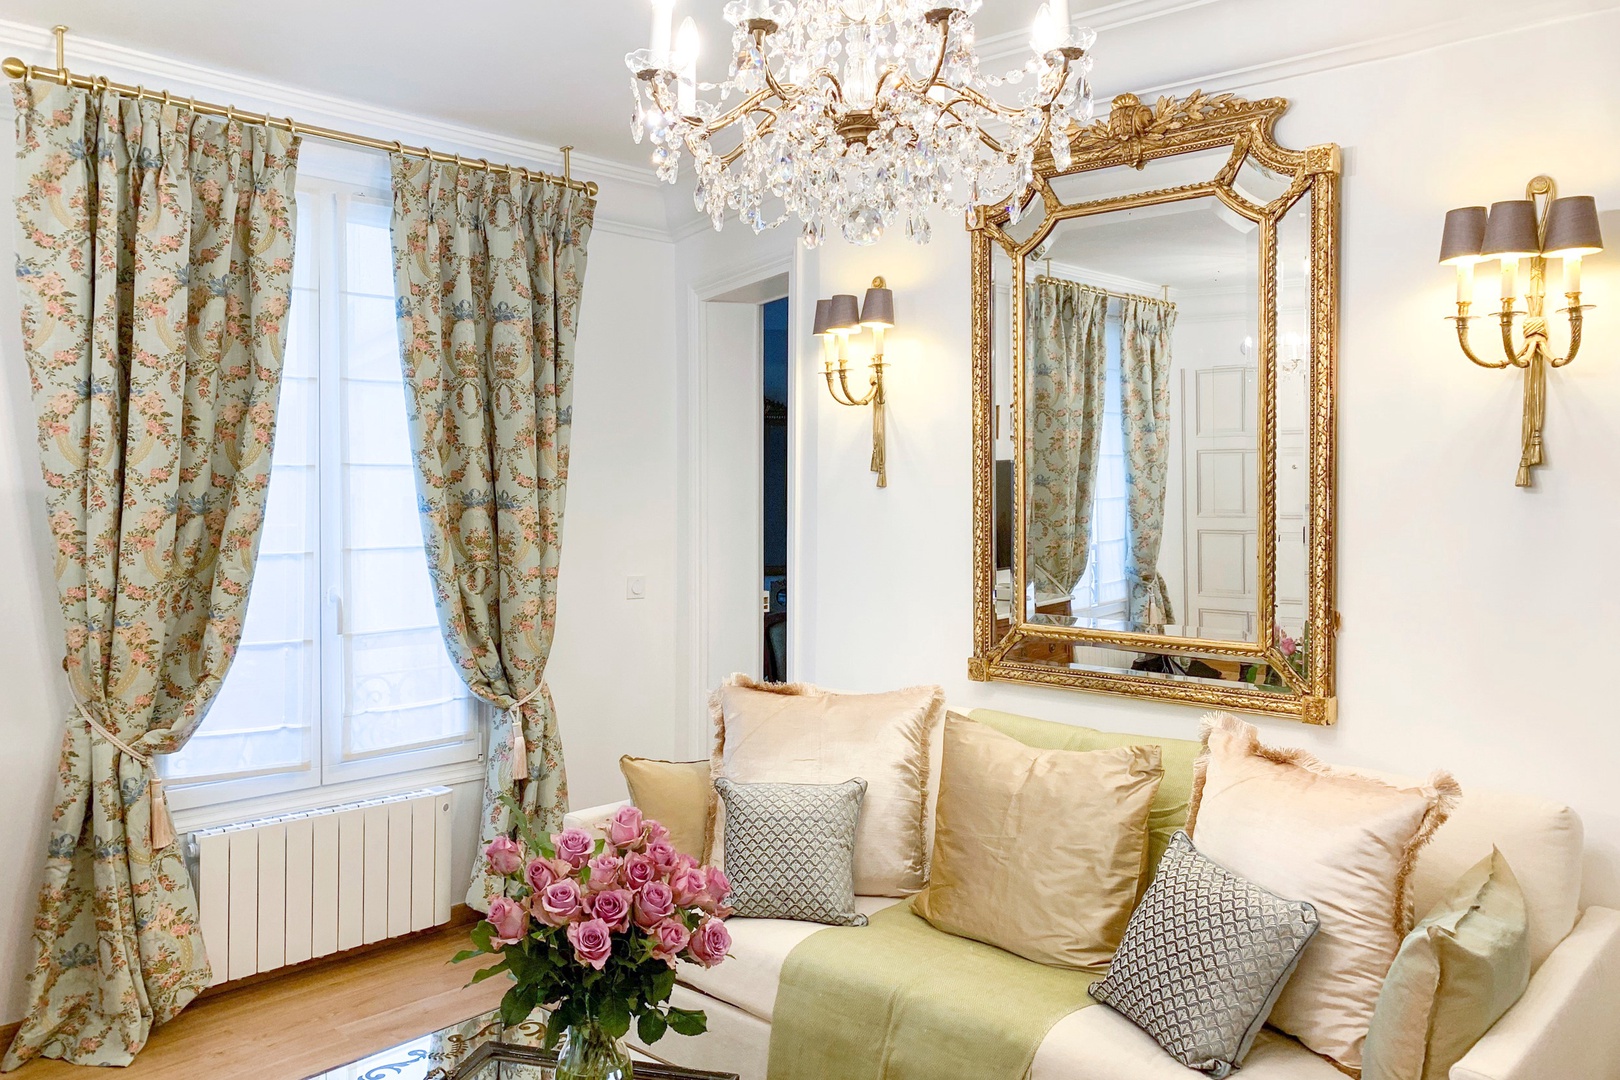 You'll fall in love with our romantic Saint Amour 4 apartment!